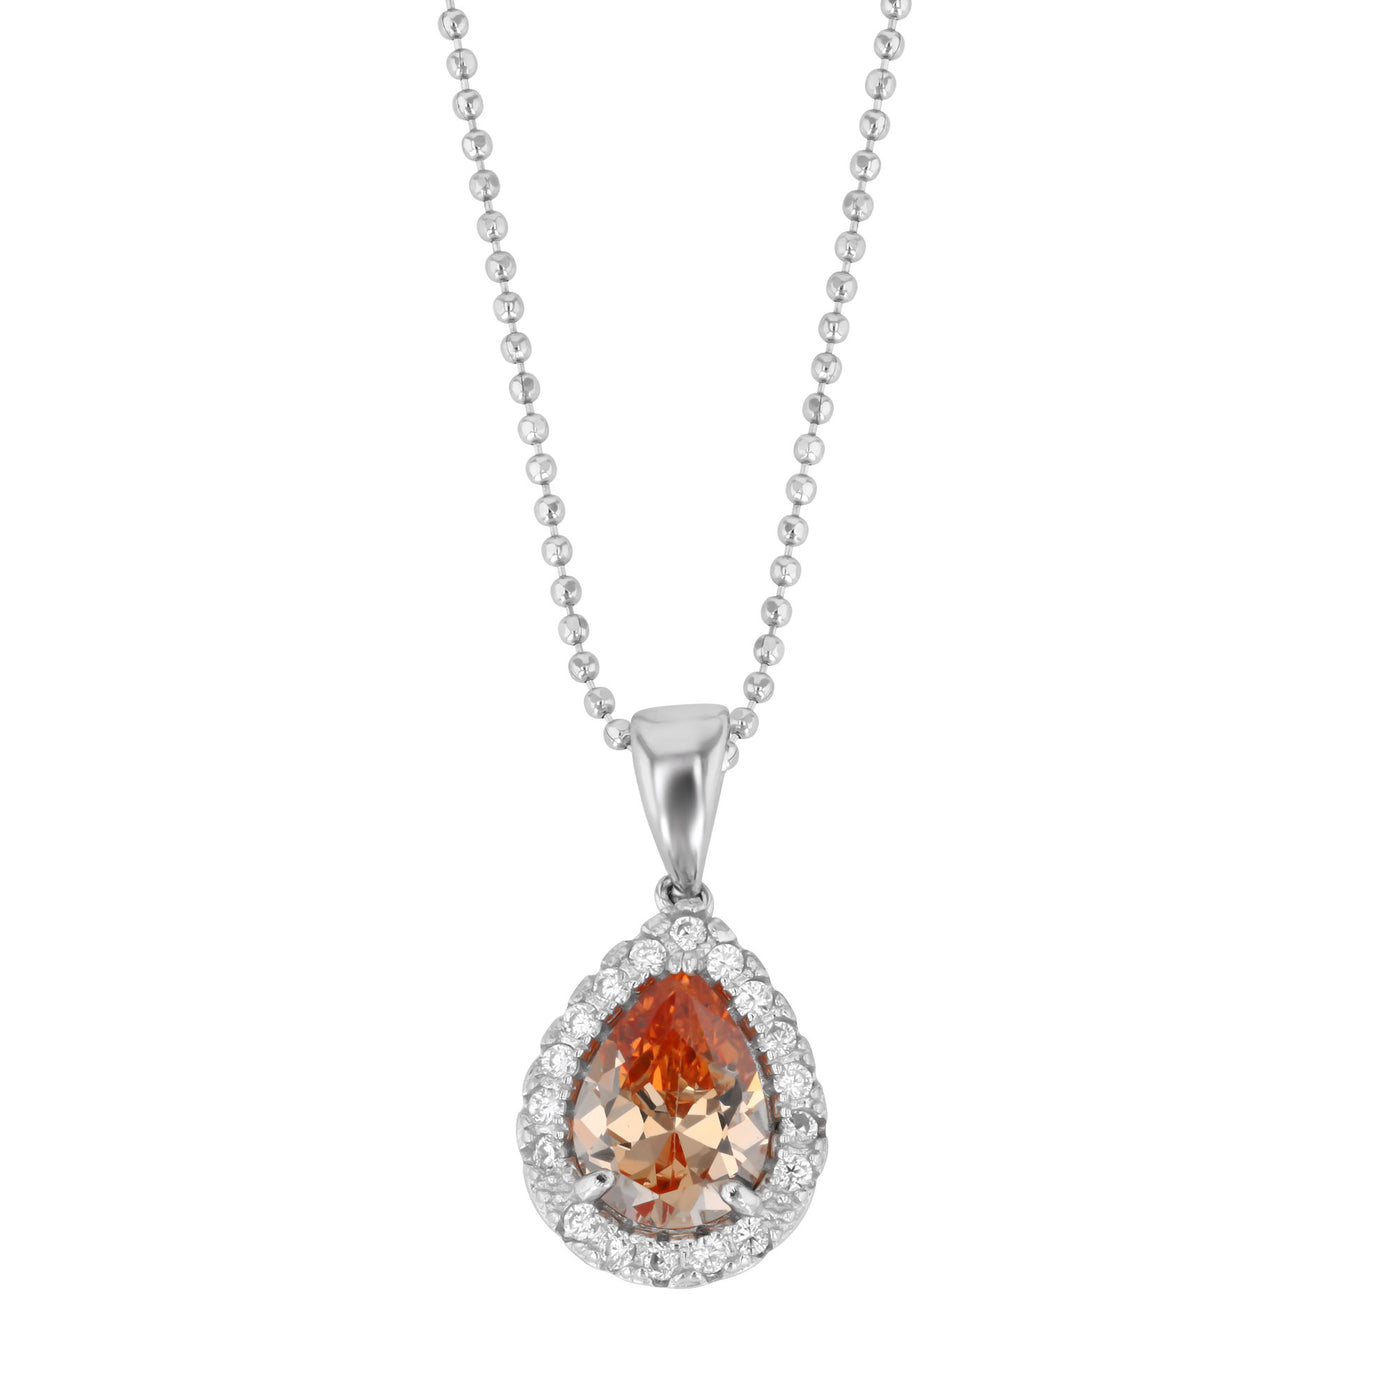 Rebecca Sloane Silver Teardrop with Faceted Champagne CZ Pendant